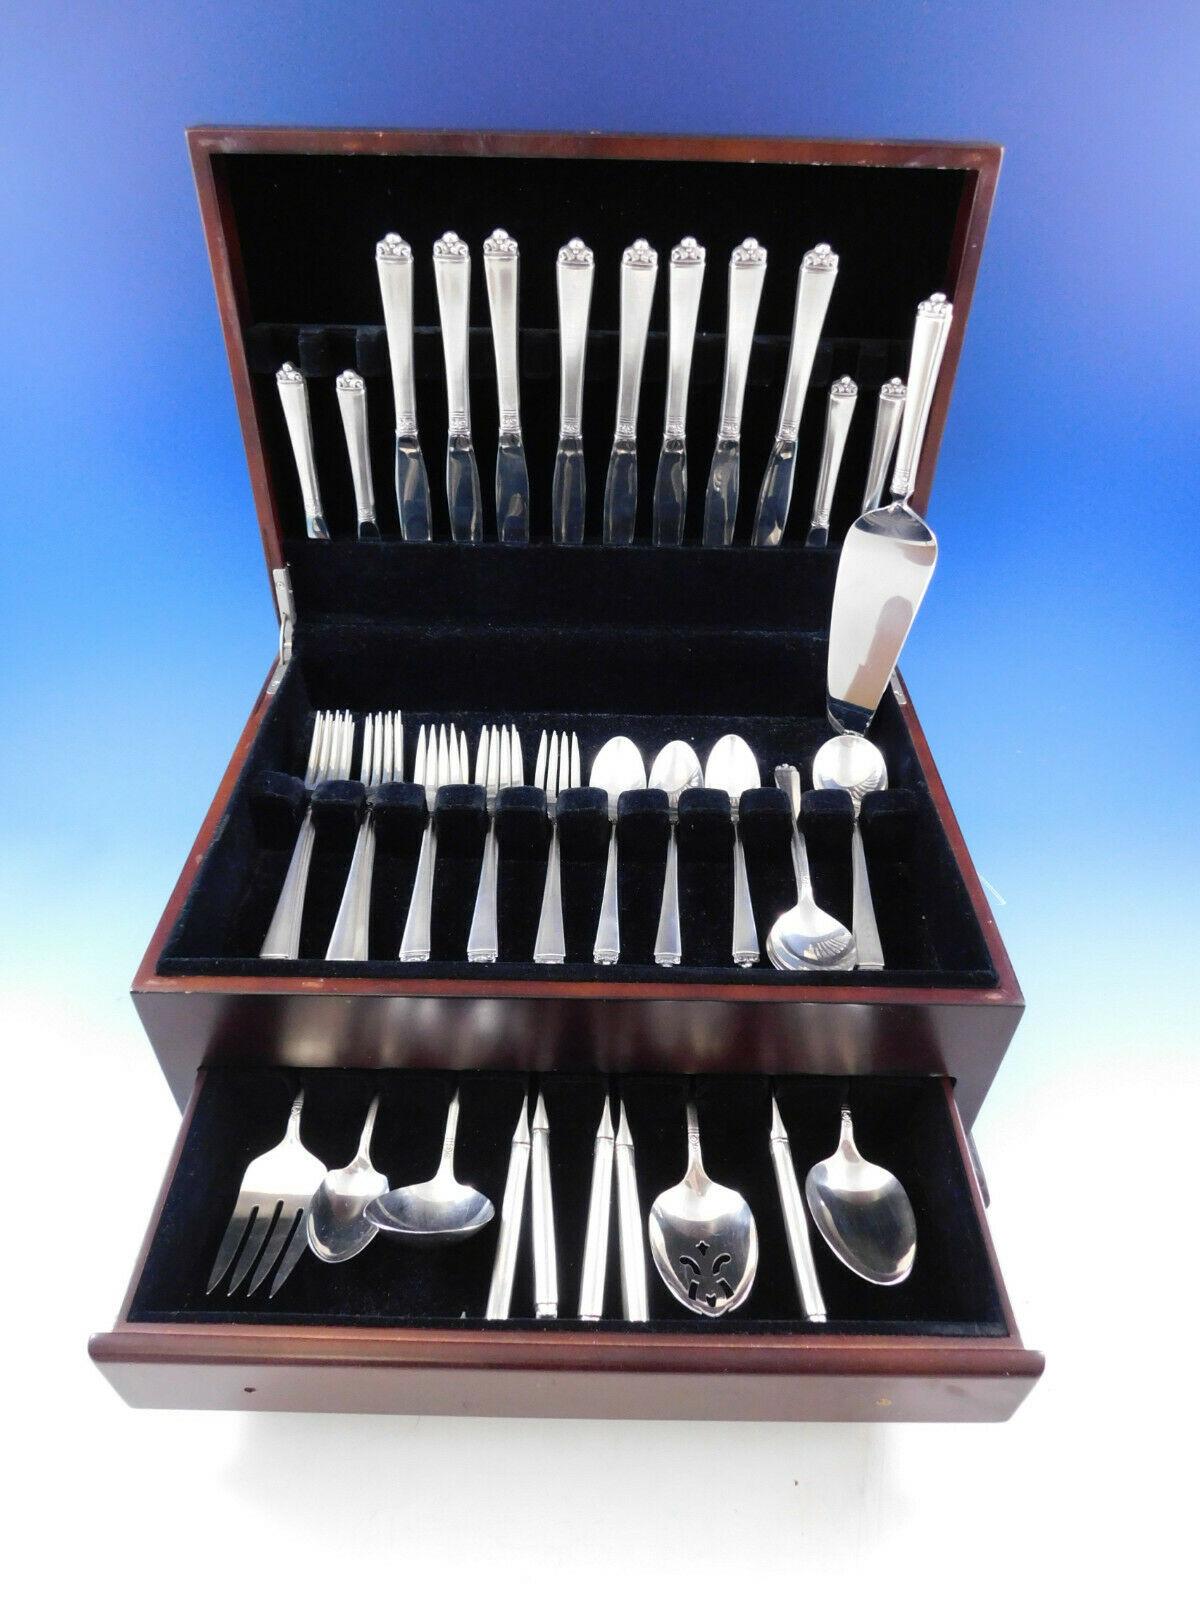 Satin beauty by Oneida sterling silver flatware set with satin finish, 55 pieces. This set includes:

8 knives, 8 7/8